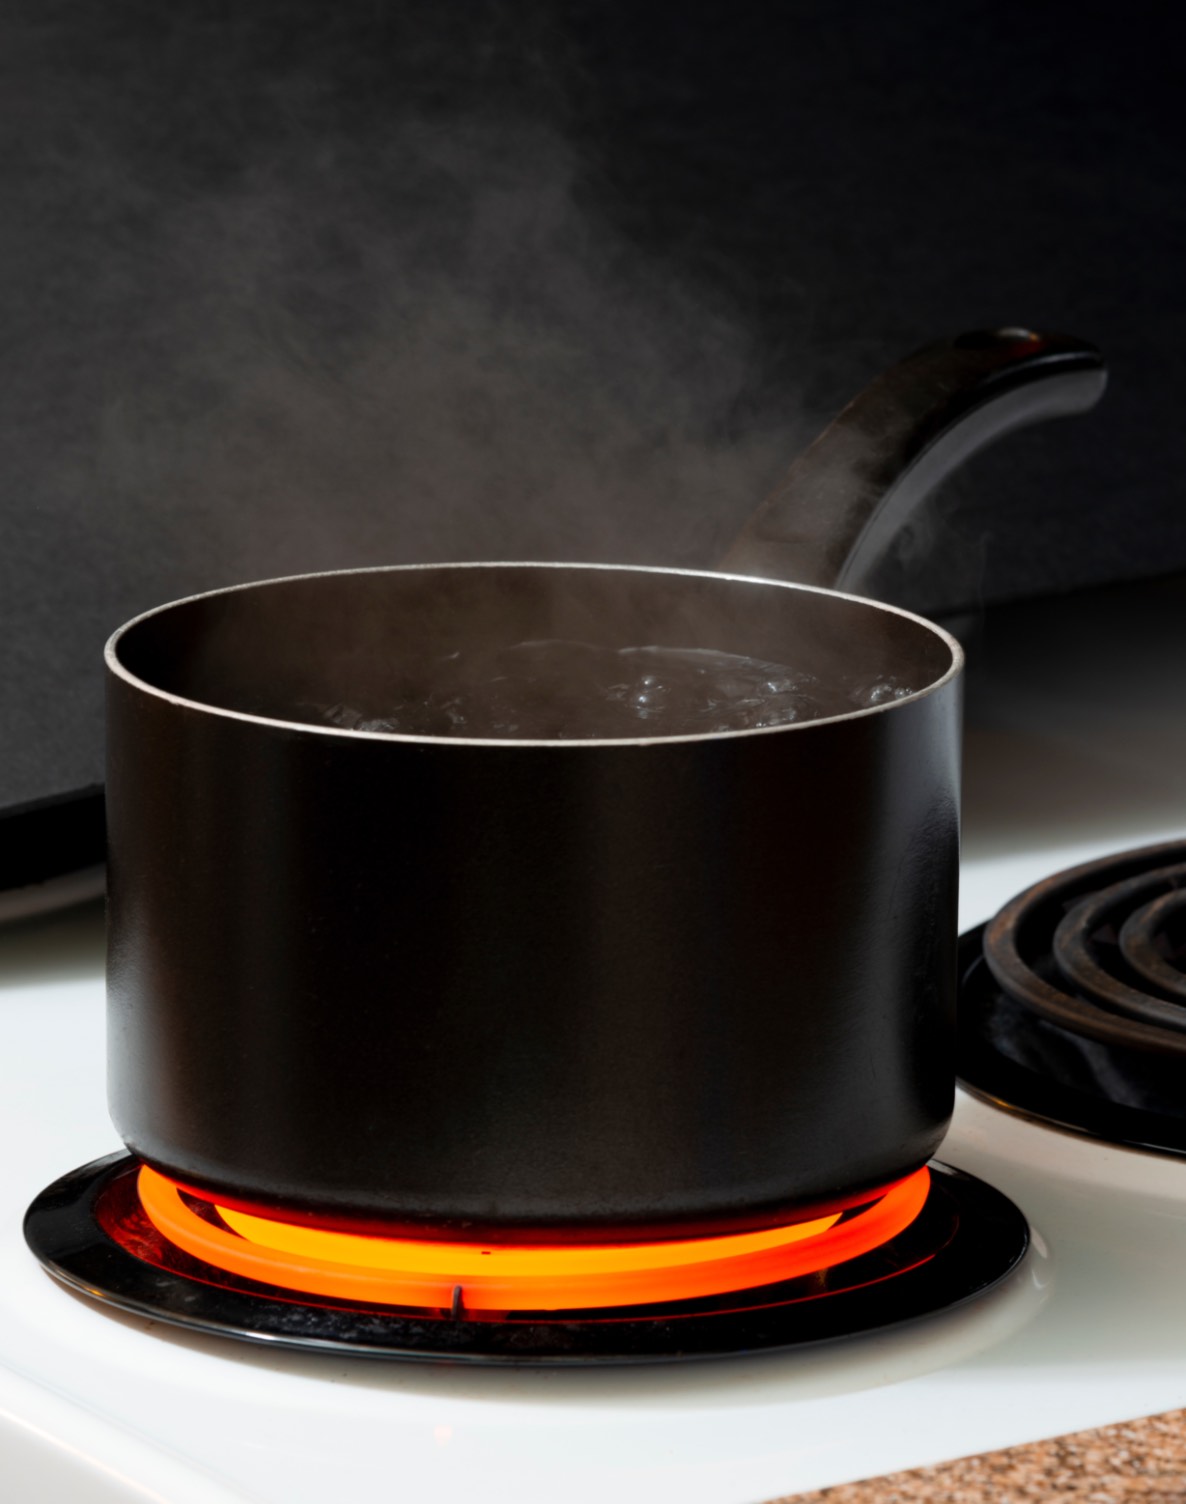 A steaming pot on a hot electric stove coil thanks to tips from Custom Electrical.